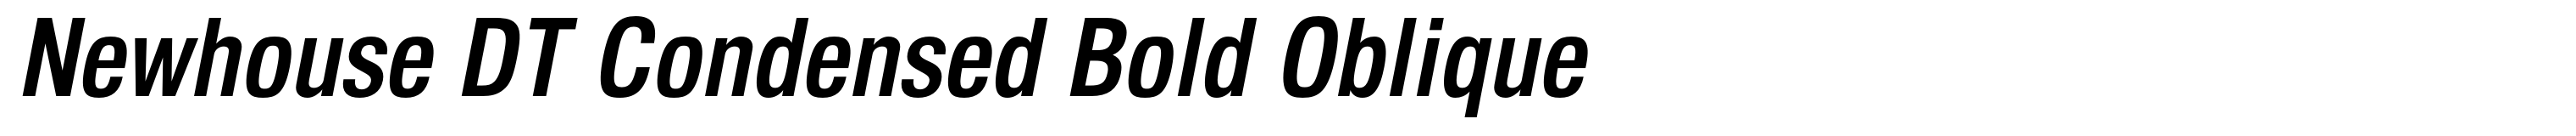 Newhouse DT Condensed Bold Oblique